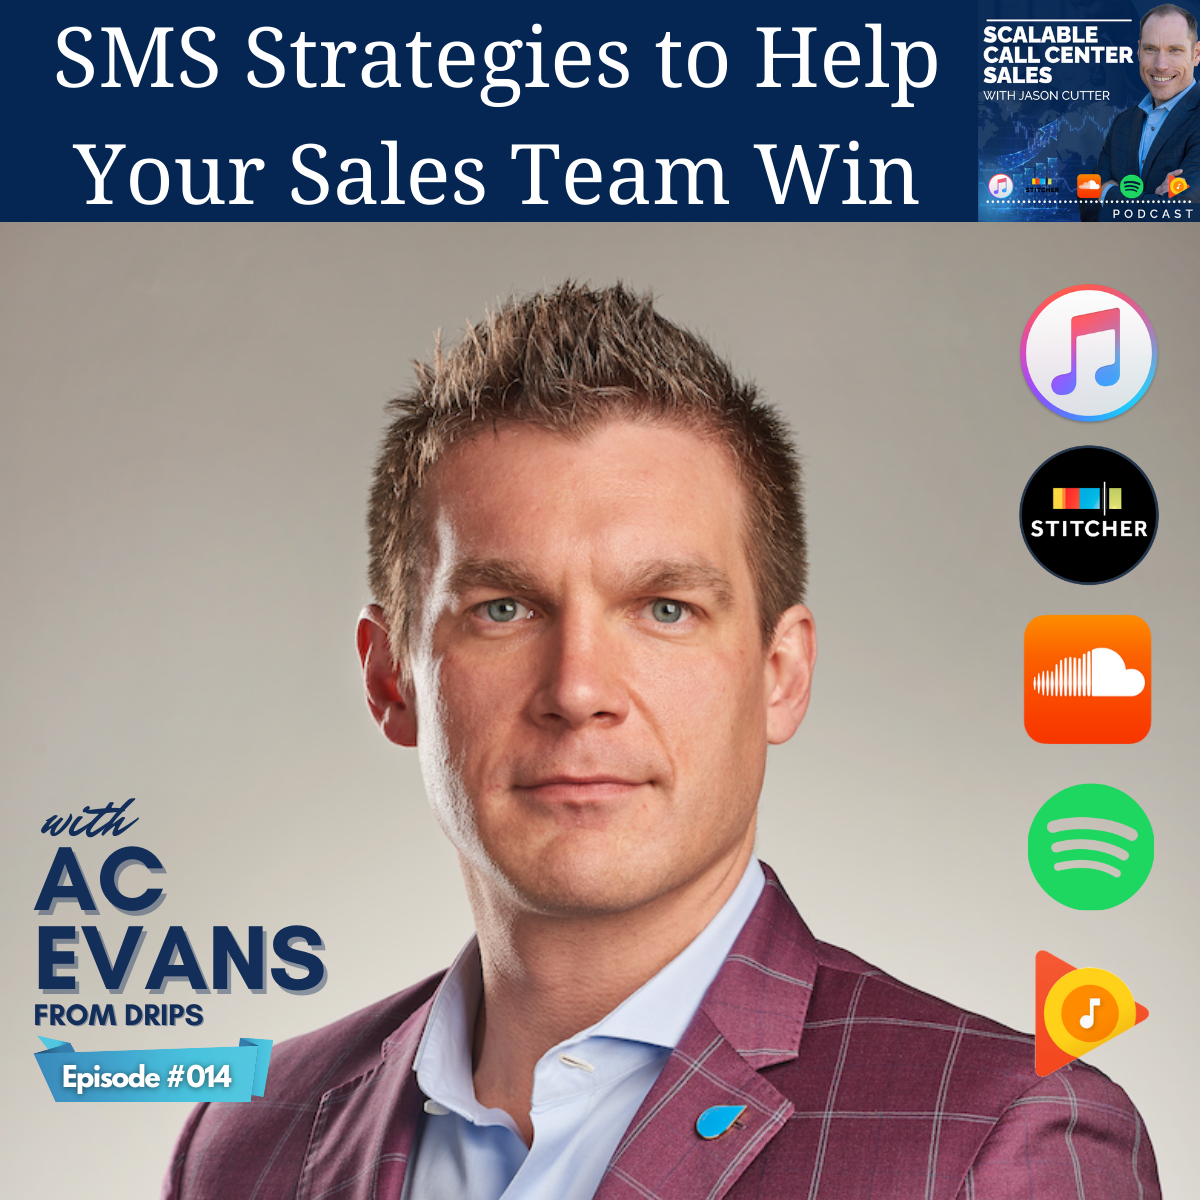 [014] SMS Strategies to Help Your Sales Team Win, with AC Evans from DRIPS